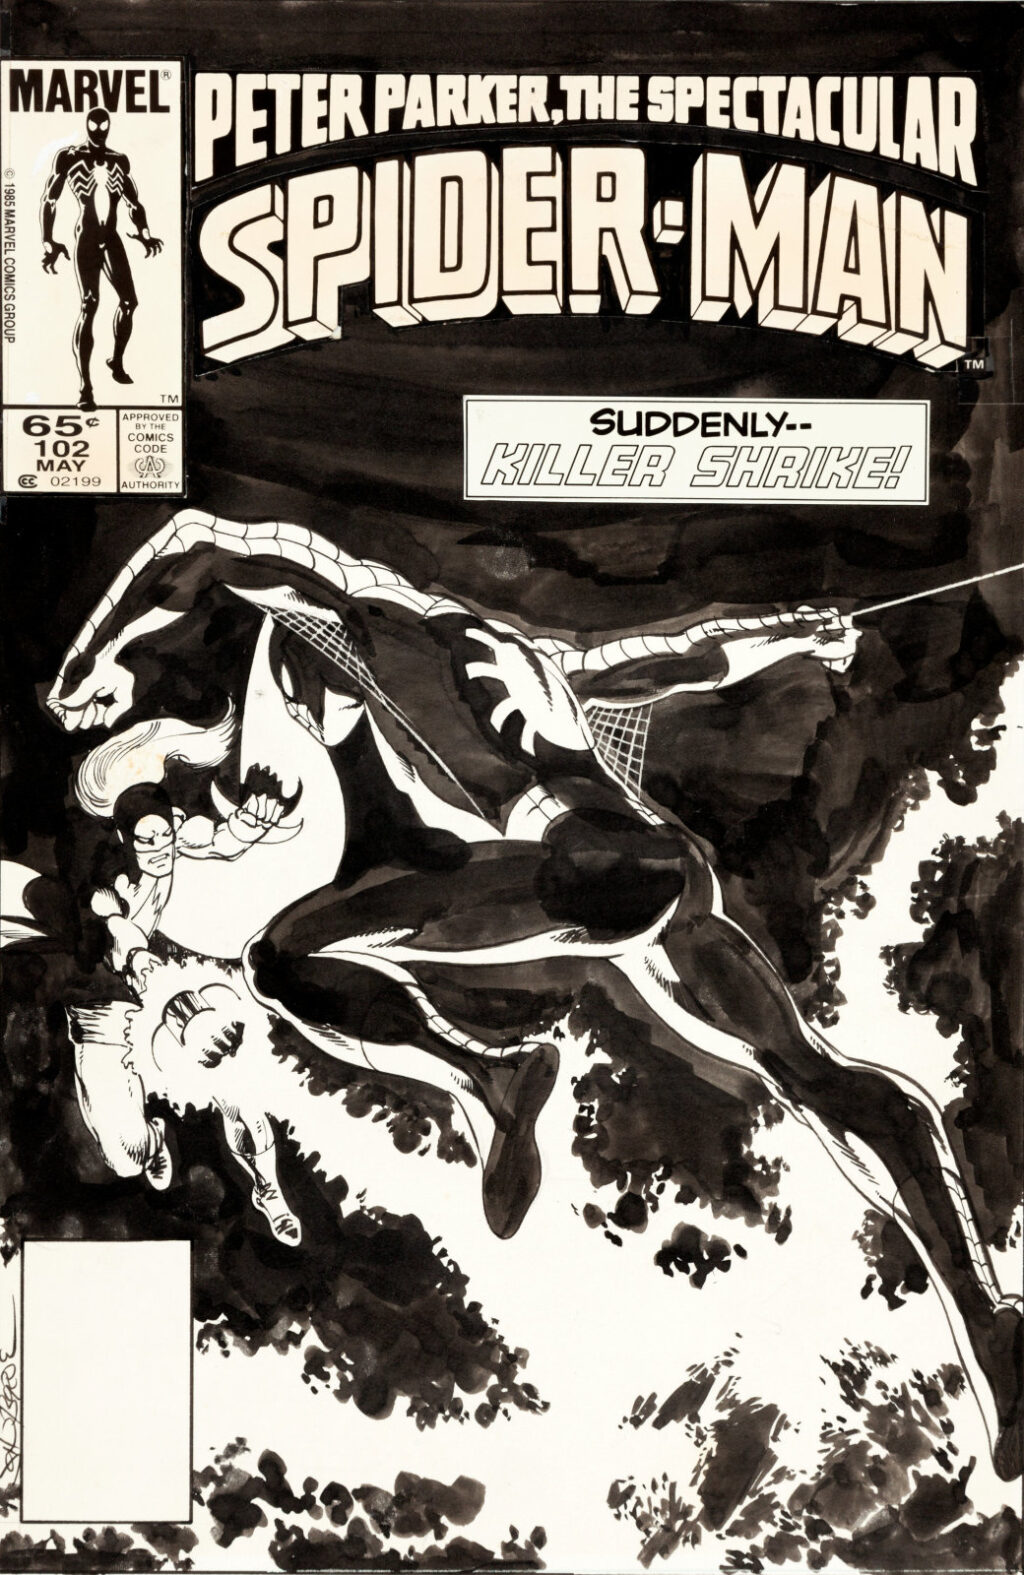 Peter Parker the Spectacular Spider Man issue 102 cover by John Byrne